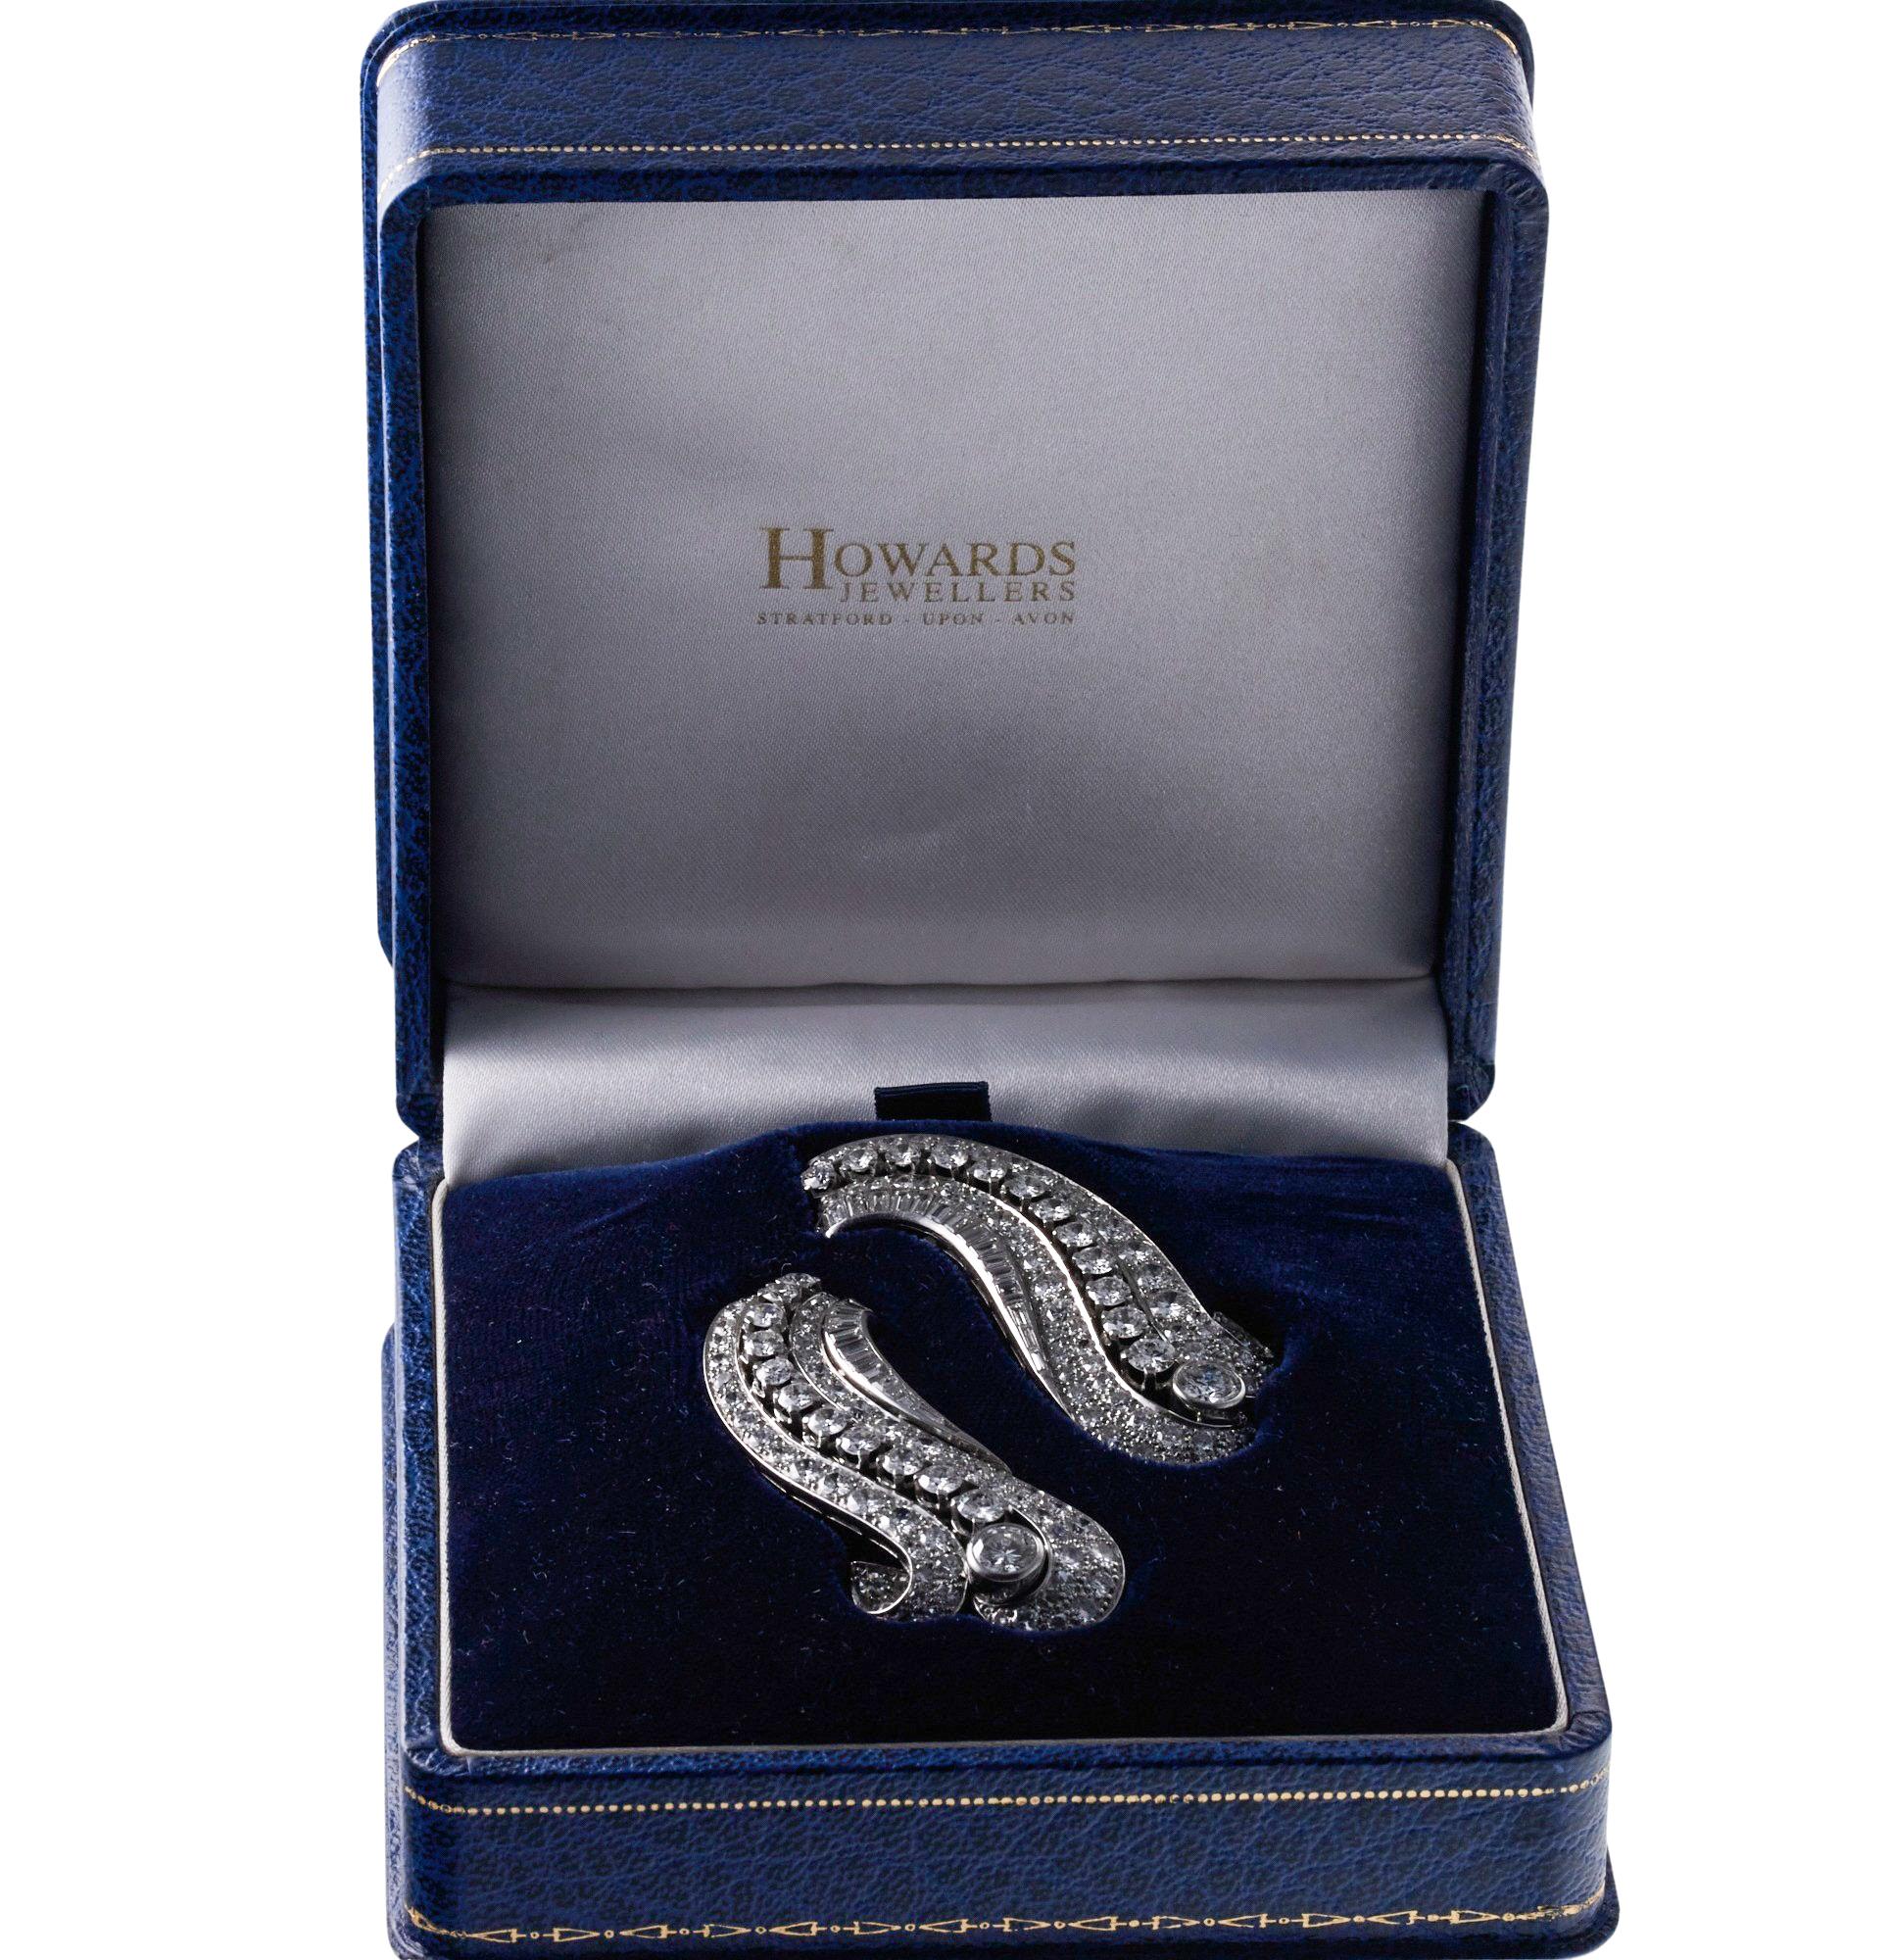 Pair of exquisite iconic Art Deco brooches, set in platinum, each adorned with a approx. 7 carats in H/VS-Si diamonds. Total approx. 18 carats. Set comes in original fitted box from the retailer Howard Jewelers. Each brooch measures 2.25